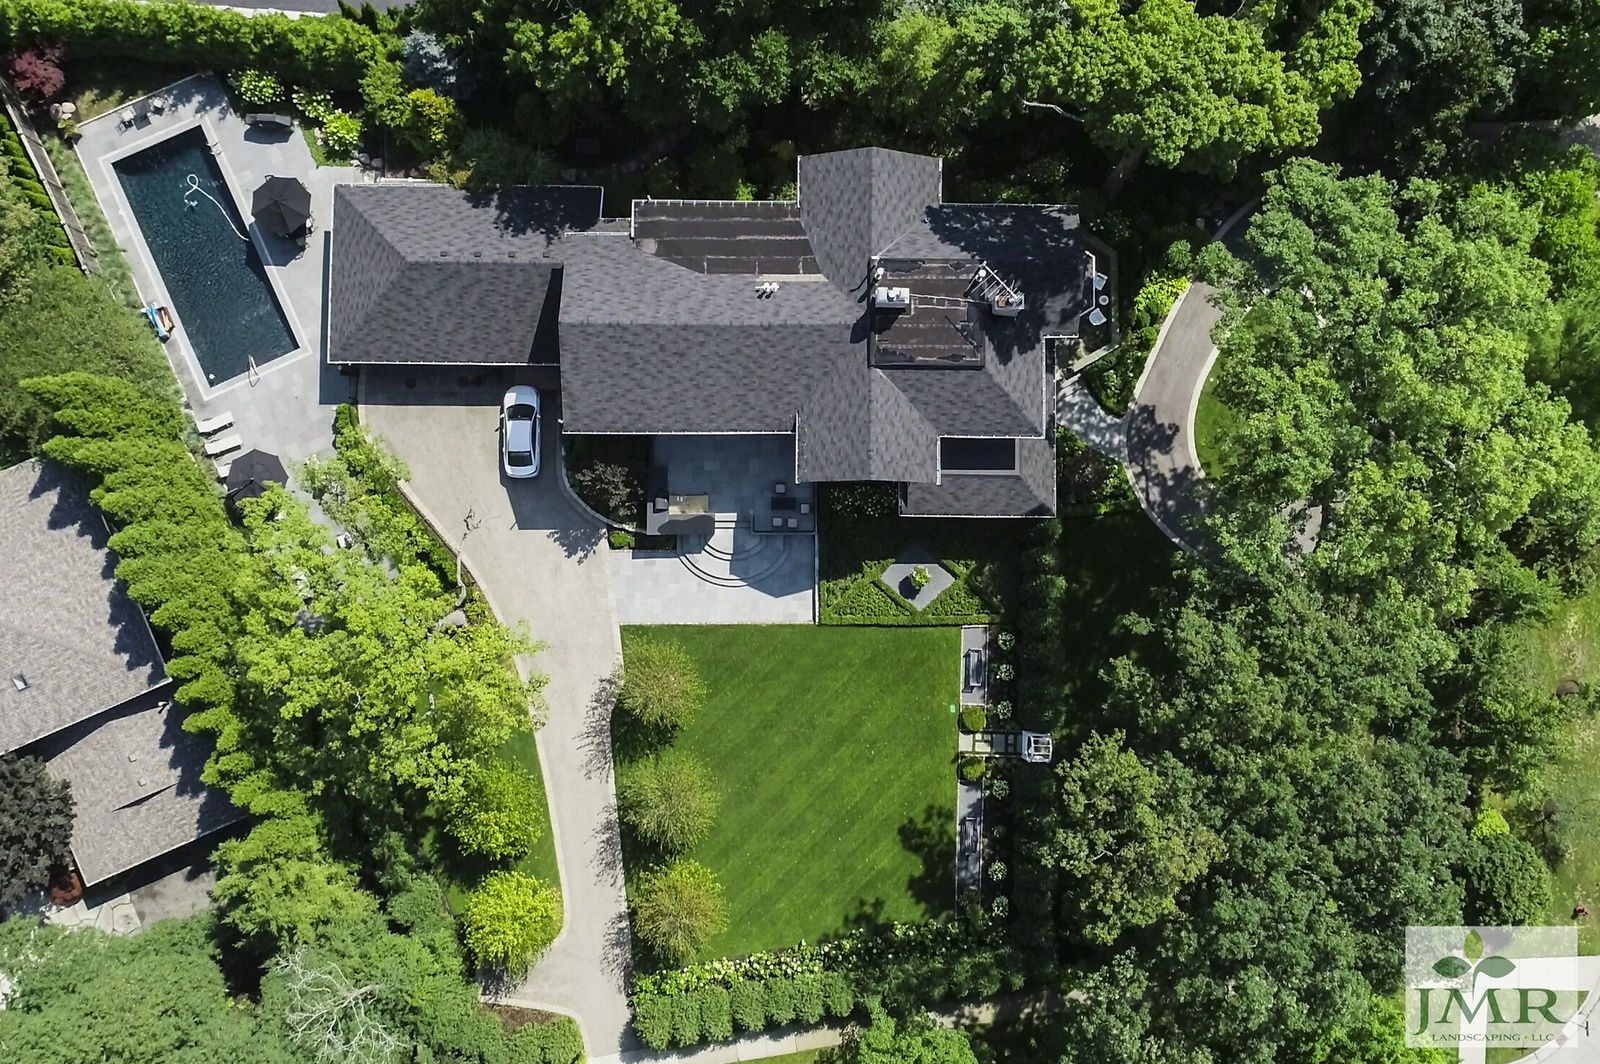 birds eye view of the property